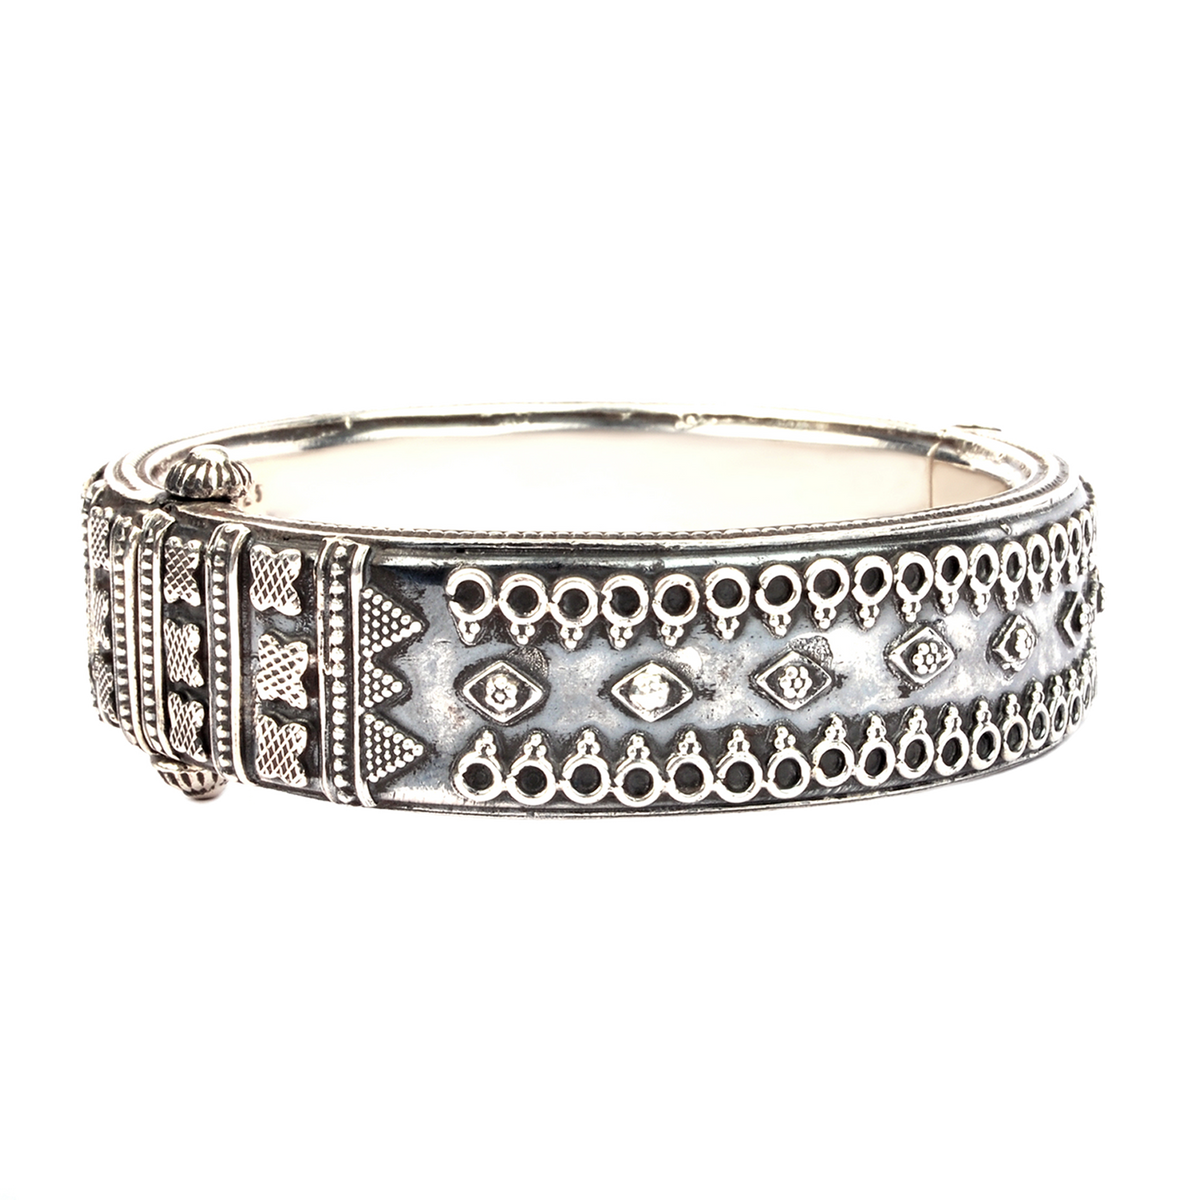 Thick oxidised silver bangle with tribal embossed motifs